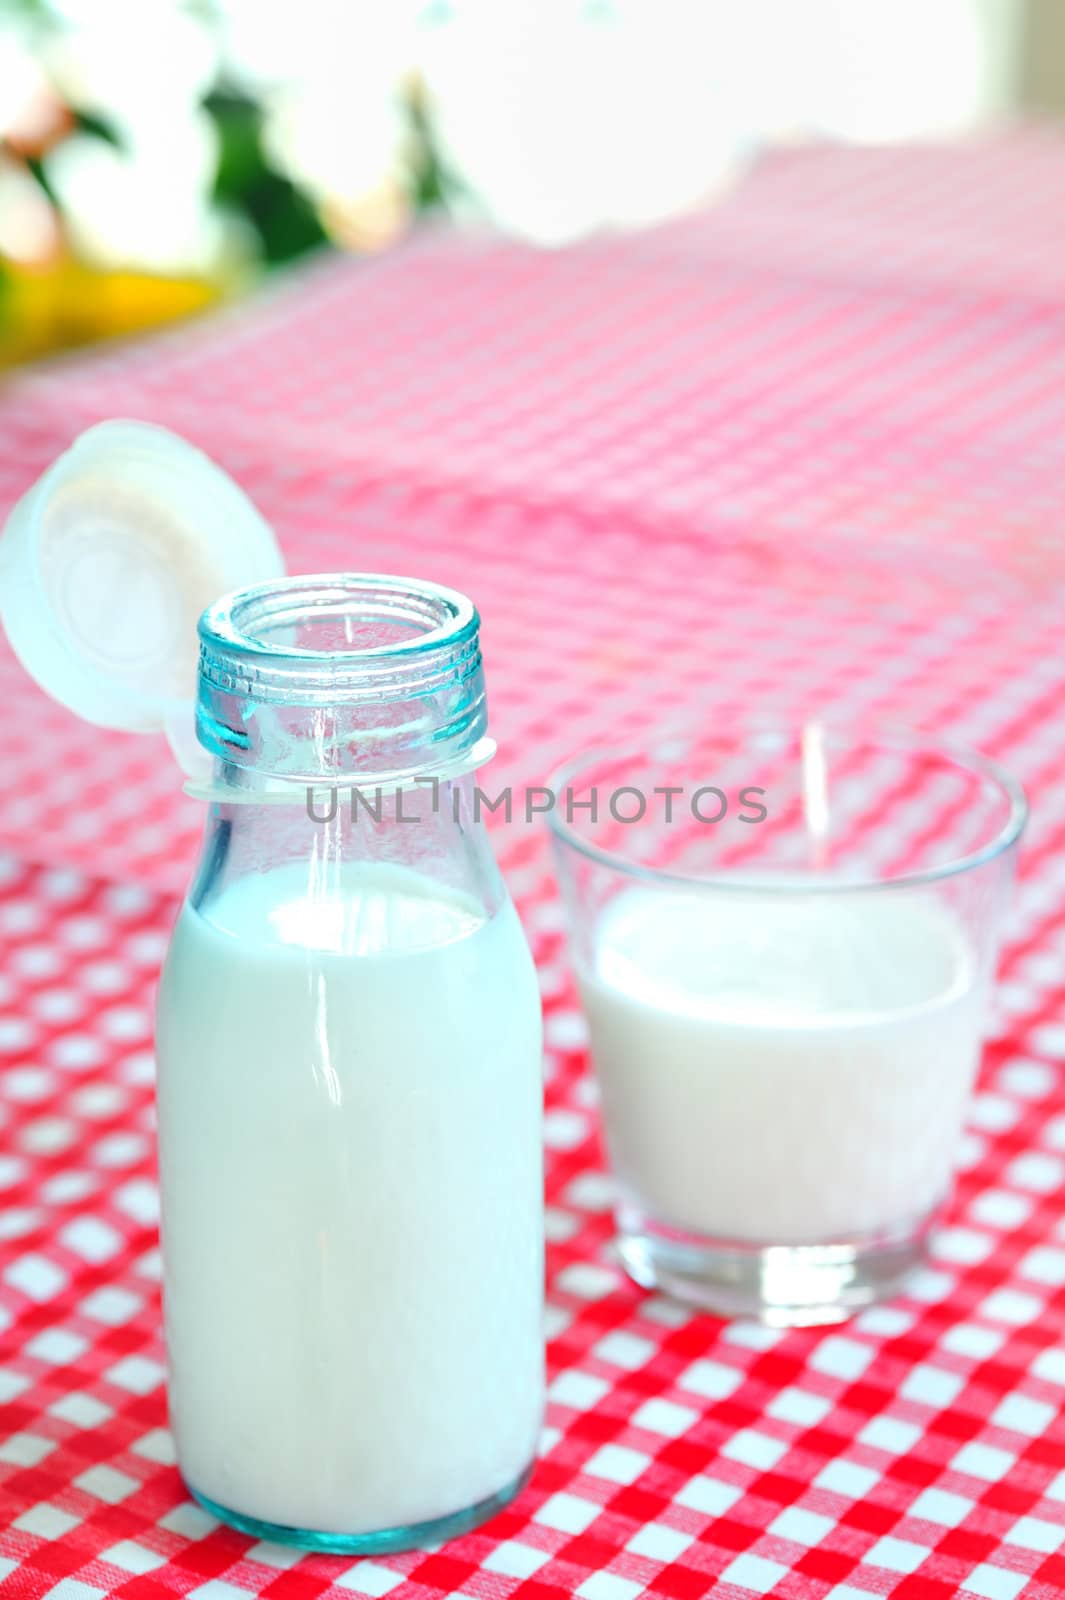 glass of milk and bottle on table